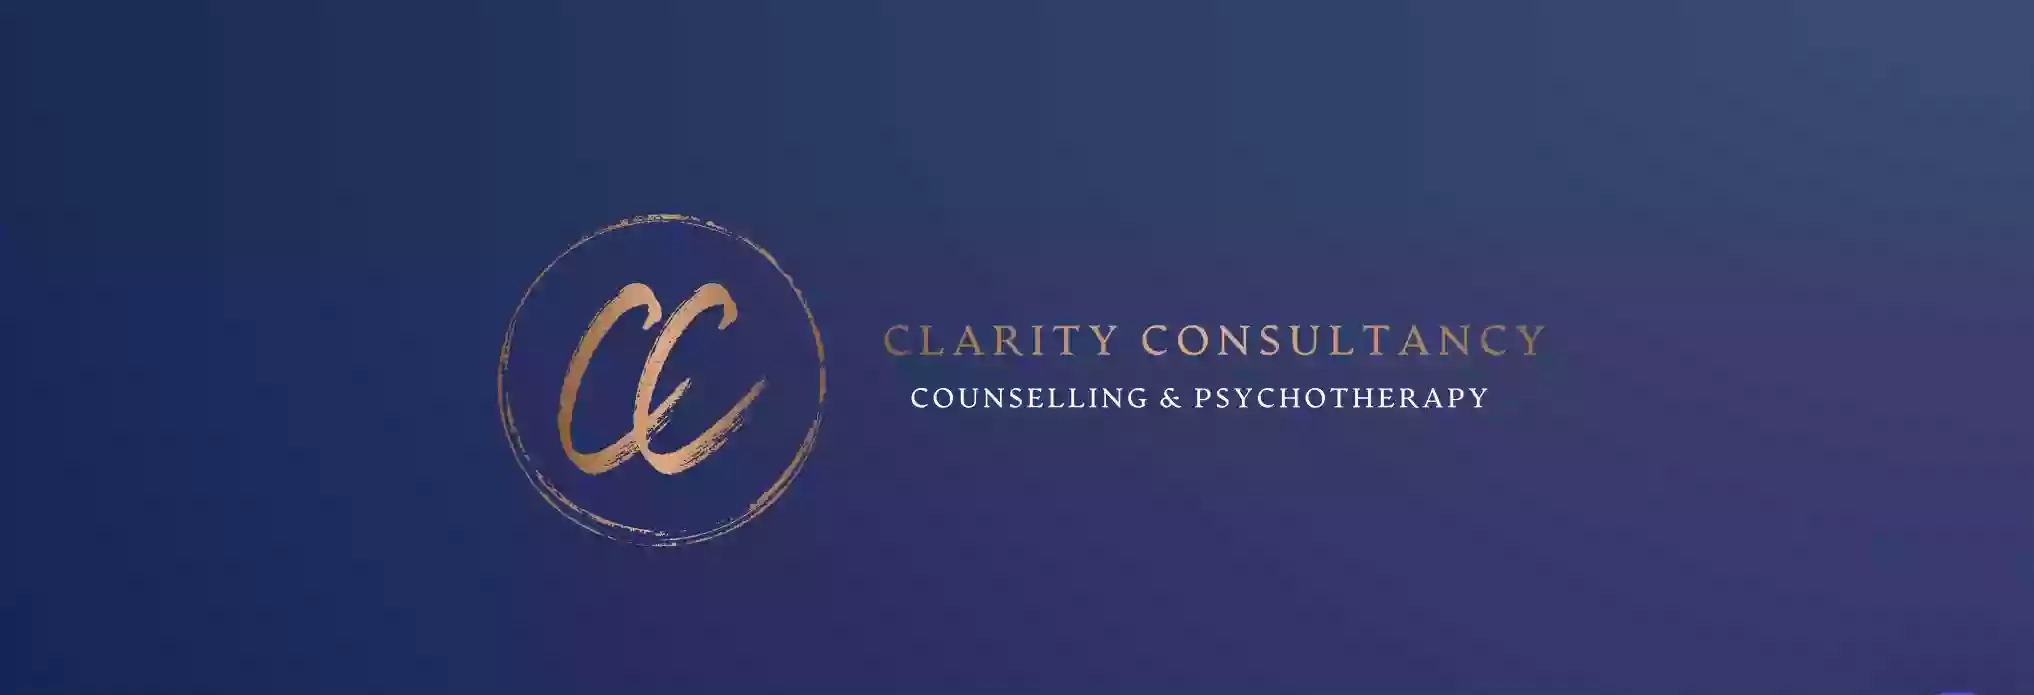 Clarity Counselling & Consultancy